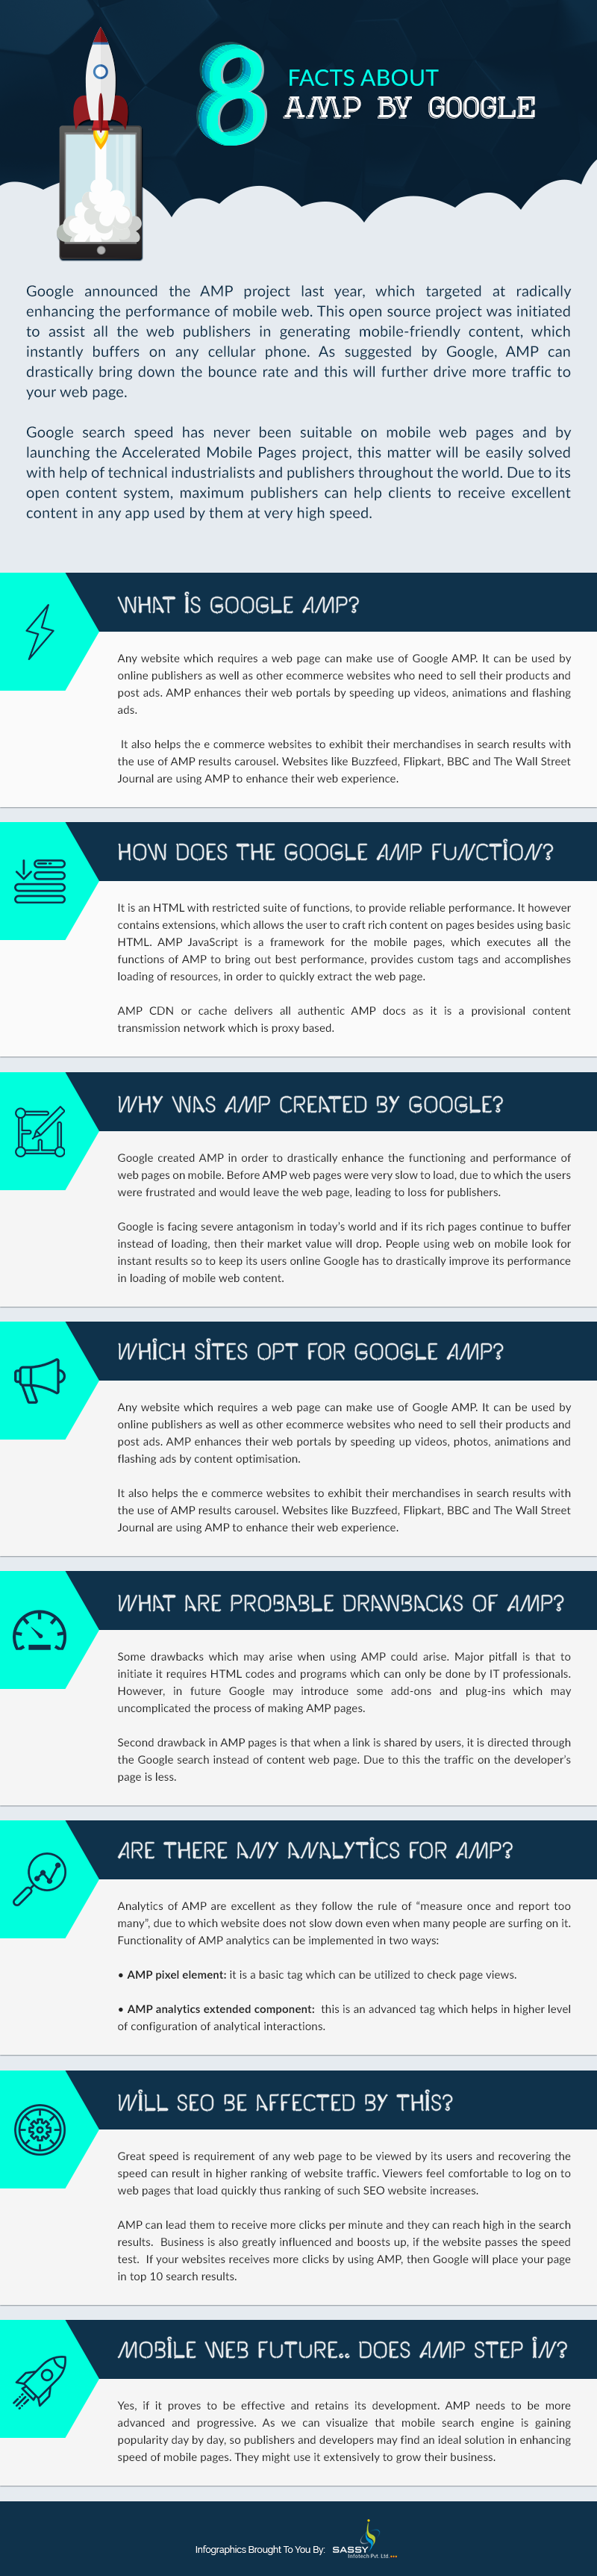 8 facts about AMP by Google or the Accelerated Mobile Pages